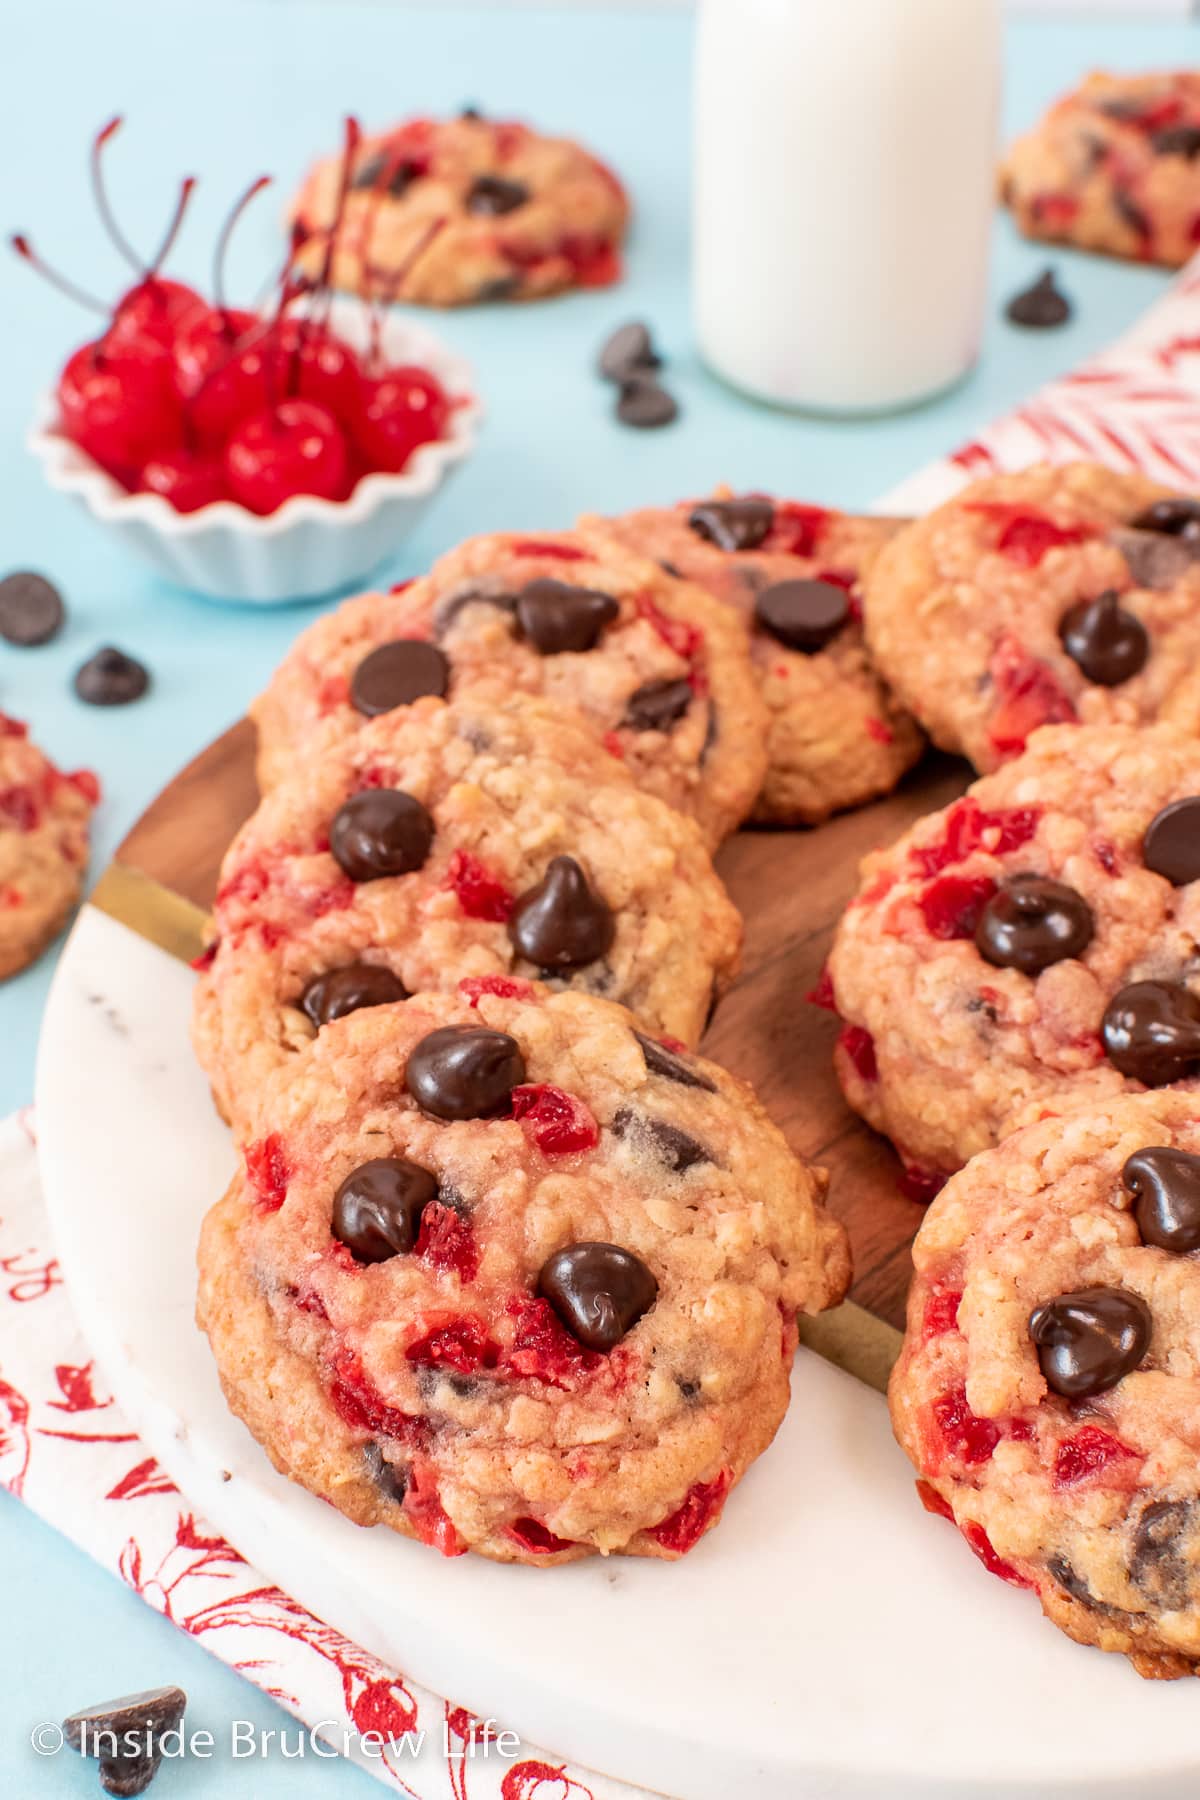 A tray of cherry cookies topped with chocolate chips.